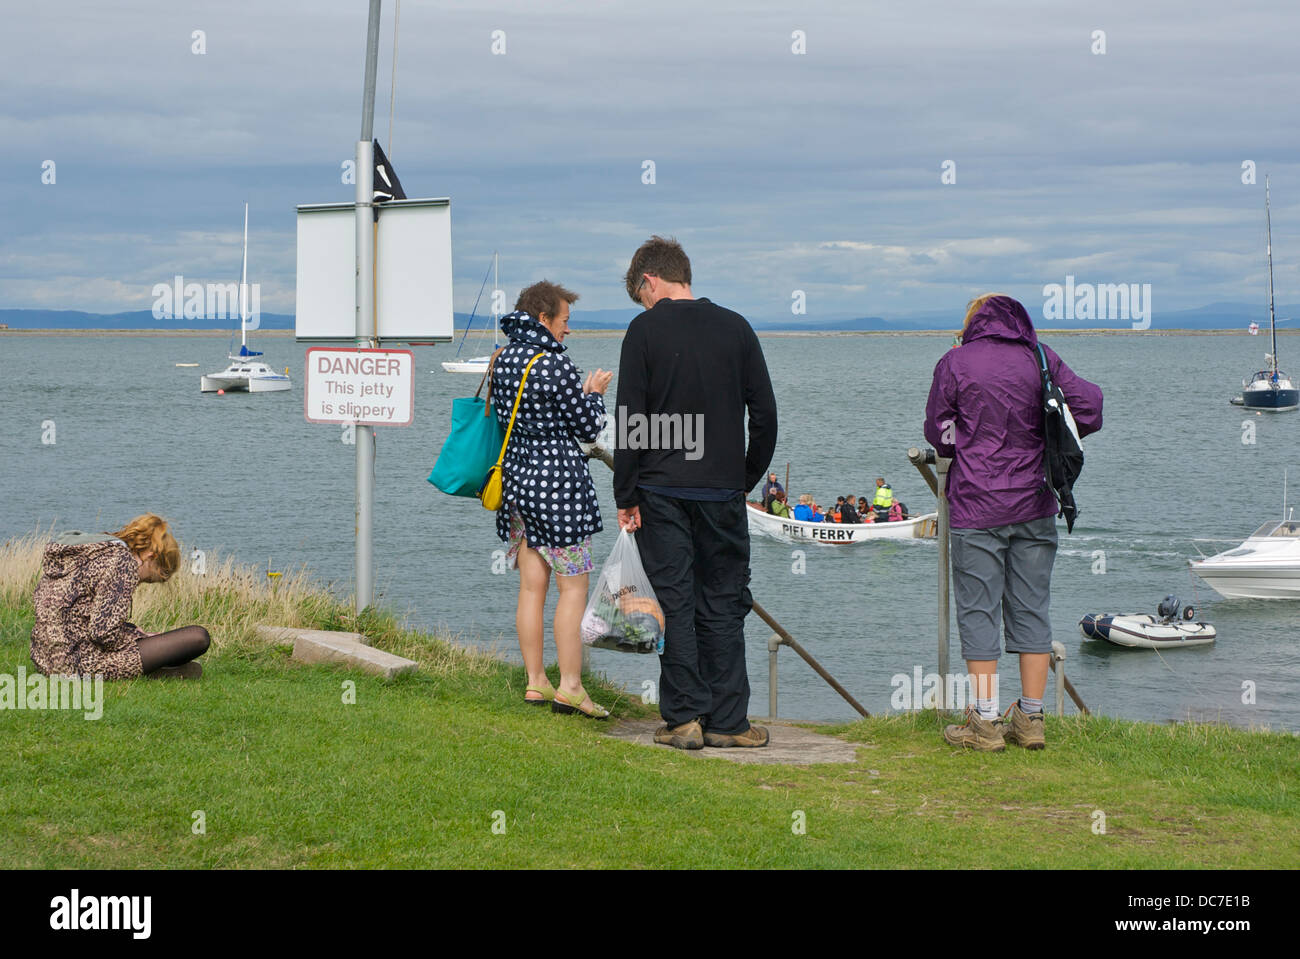 Four people waiting for the ferry to return, Piel Island, South Lakeland, Cumbria, England UK Stock Photo